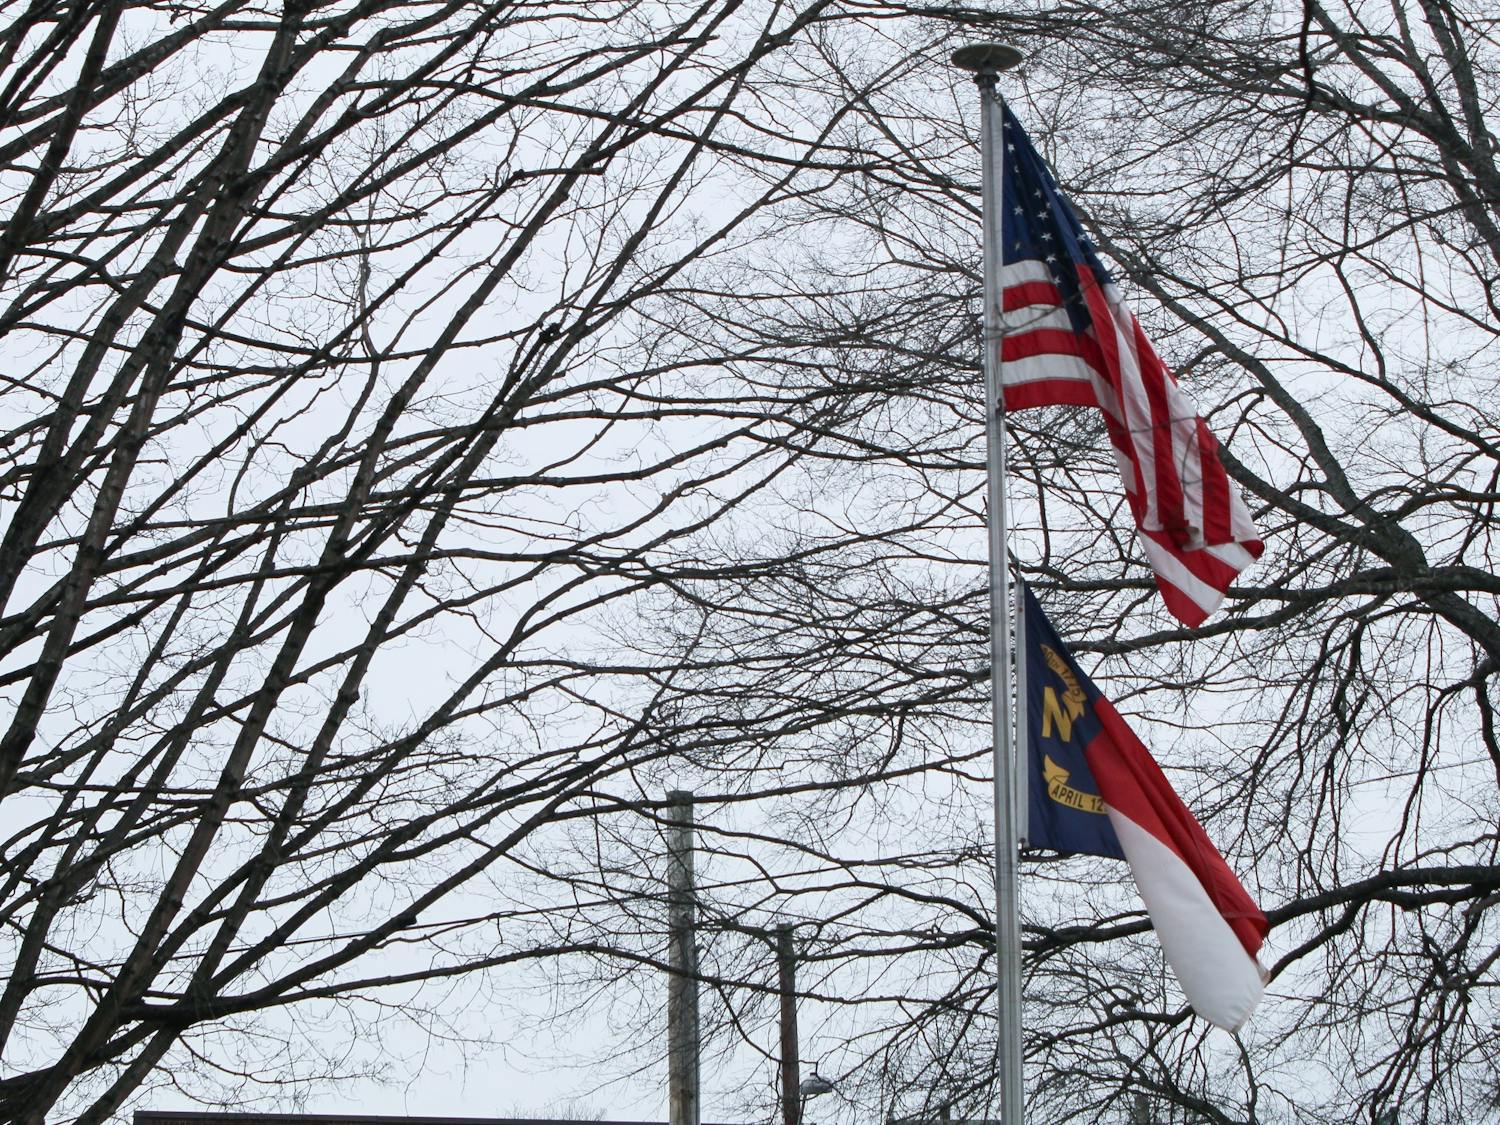 The national and state flag stand outside of the Board of Elections building in Hillsborough, N.C. on Feb. 8, 2020.&nbsp;